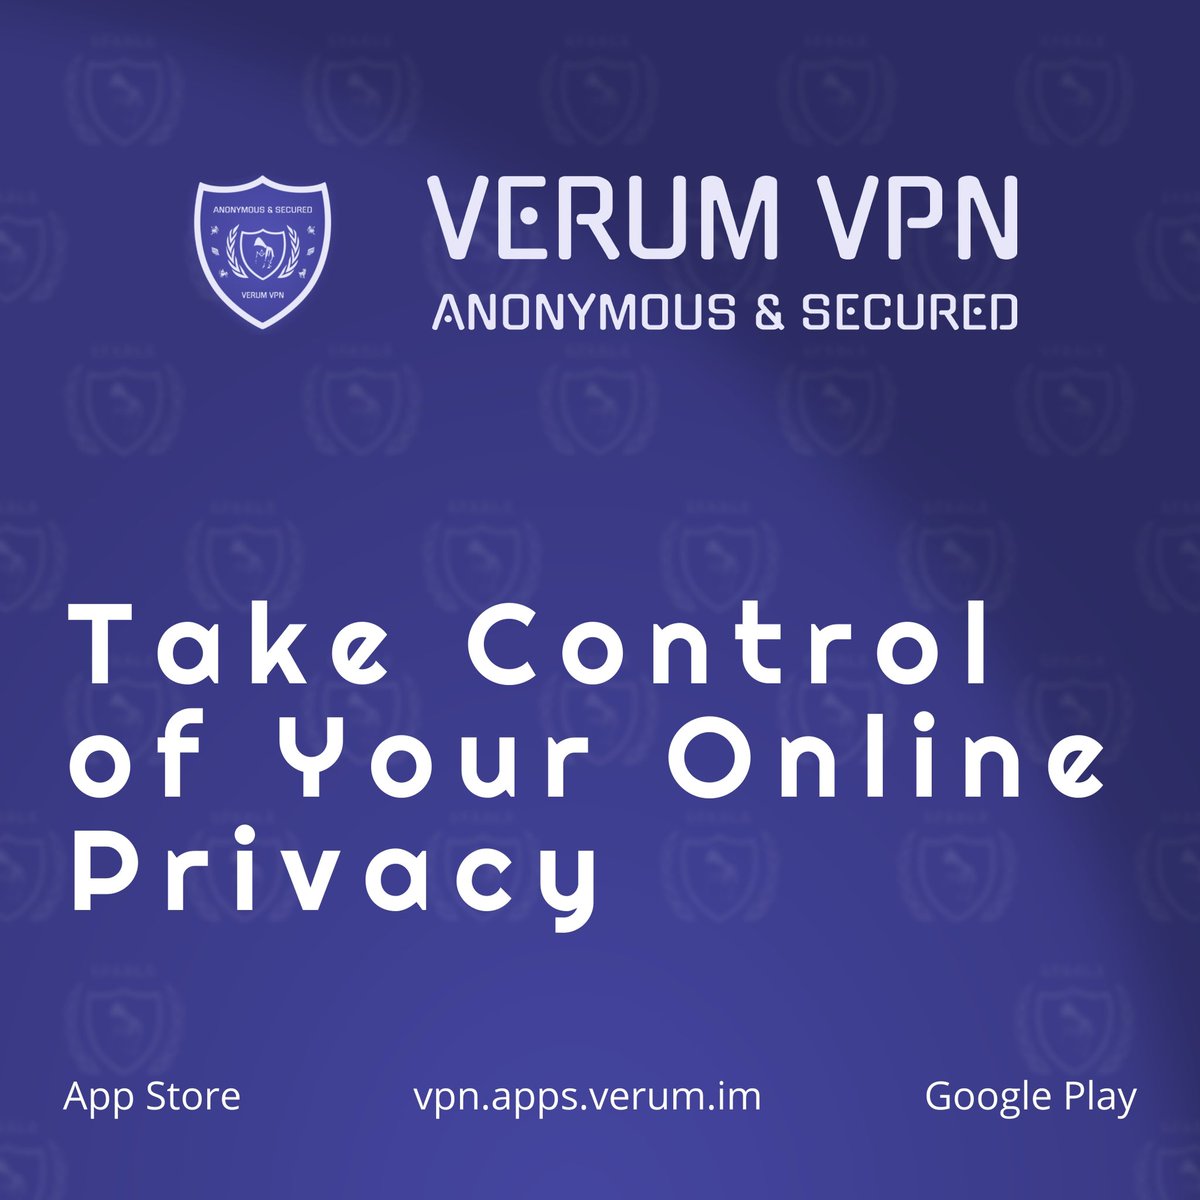 Are you concerned about your online privacy? With Verum VPN, you can surf the web without worrying about hackers, data thieves, or even your internet service provider spying on your activities. 🛡️🌐

vpn.apps.verum.im

#VerumVPN #OnlineSecurity #PrivacyFirst #SafeBrowsing